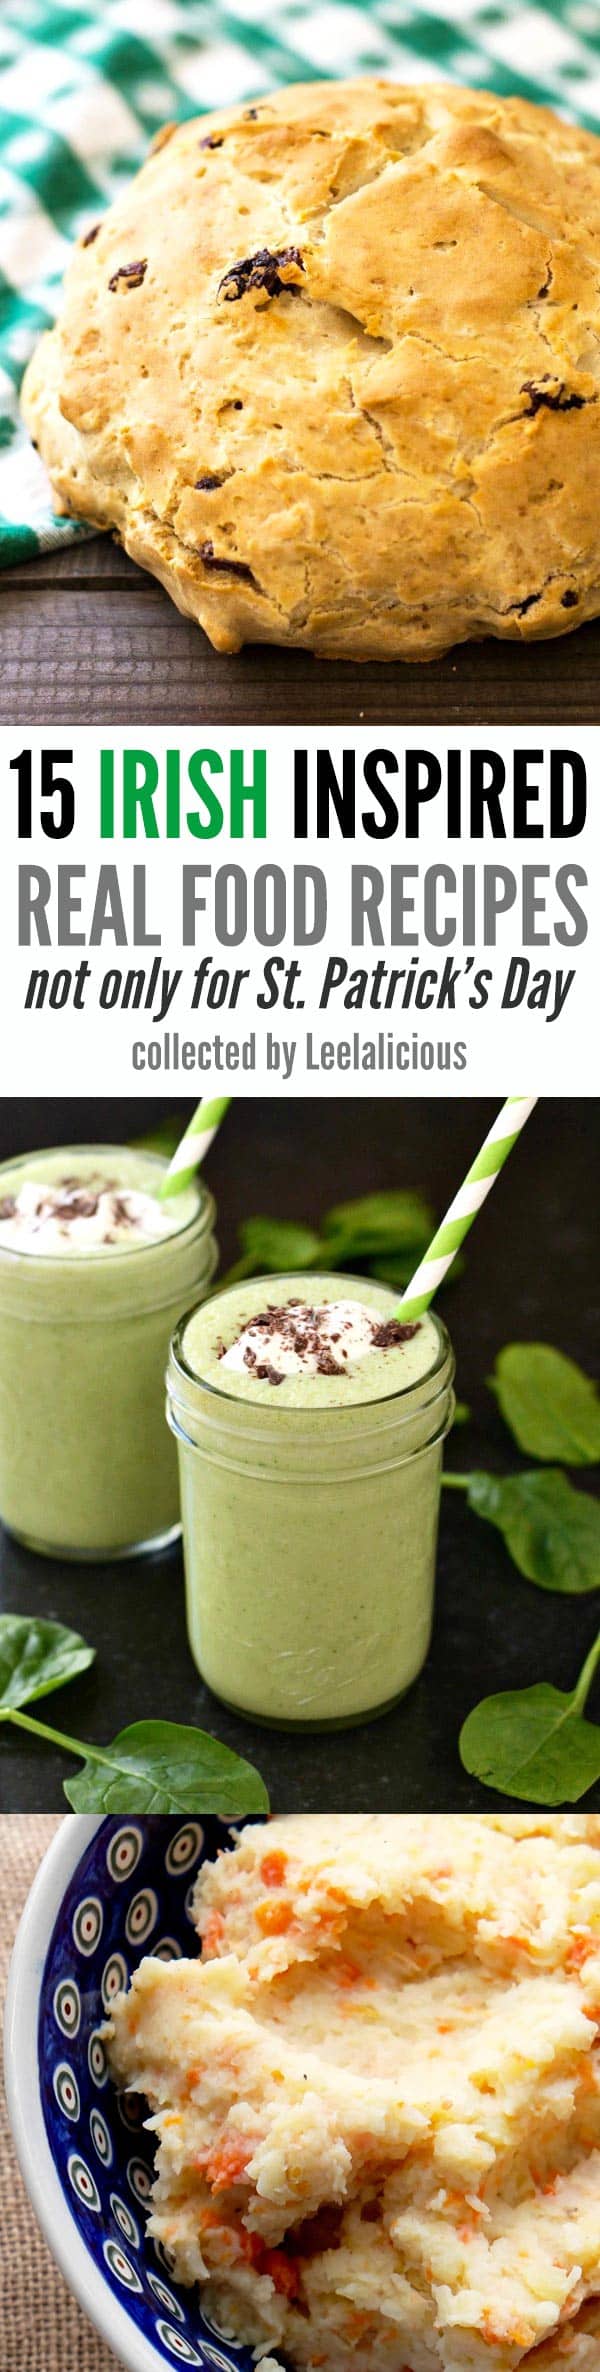 These wonderful Irish inspired real food recipes are great for St. Patrick's Day or really any time of year. Find recipes for delicious soda breads, comforting potato dishes and hearty Irish meats in this recipe round up.